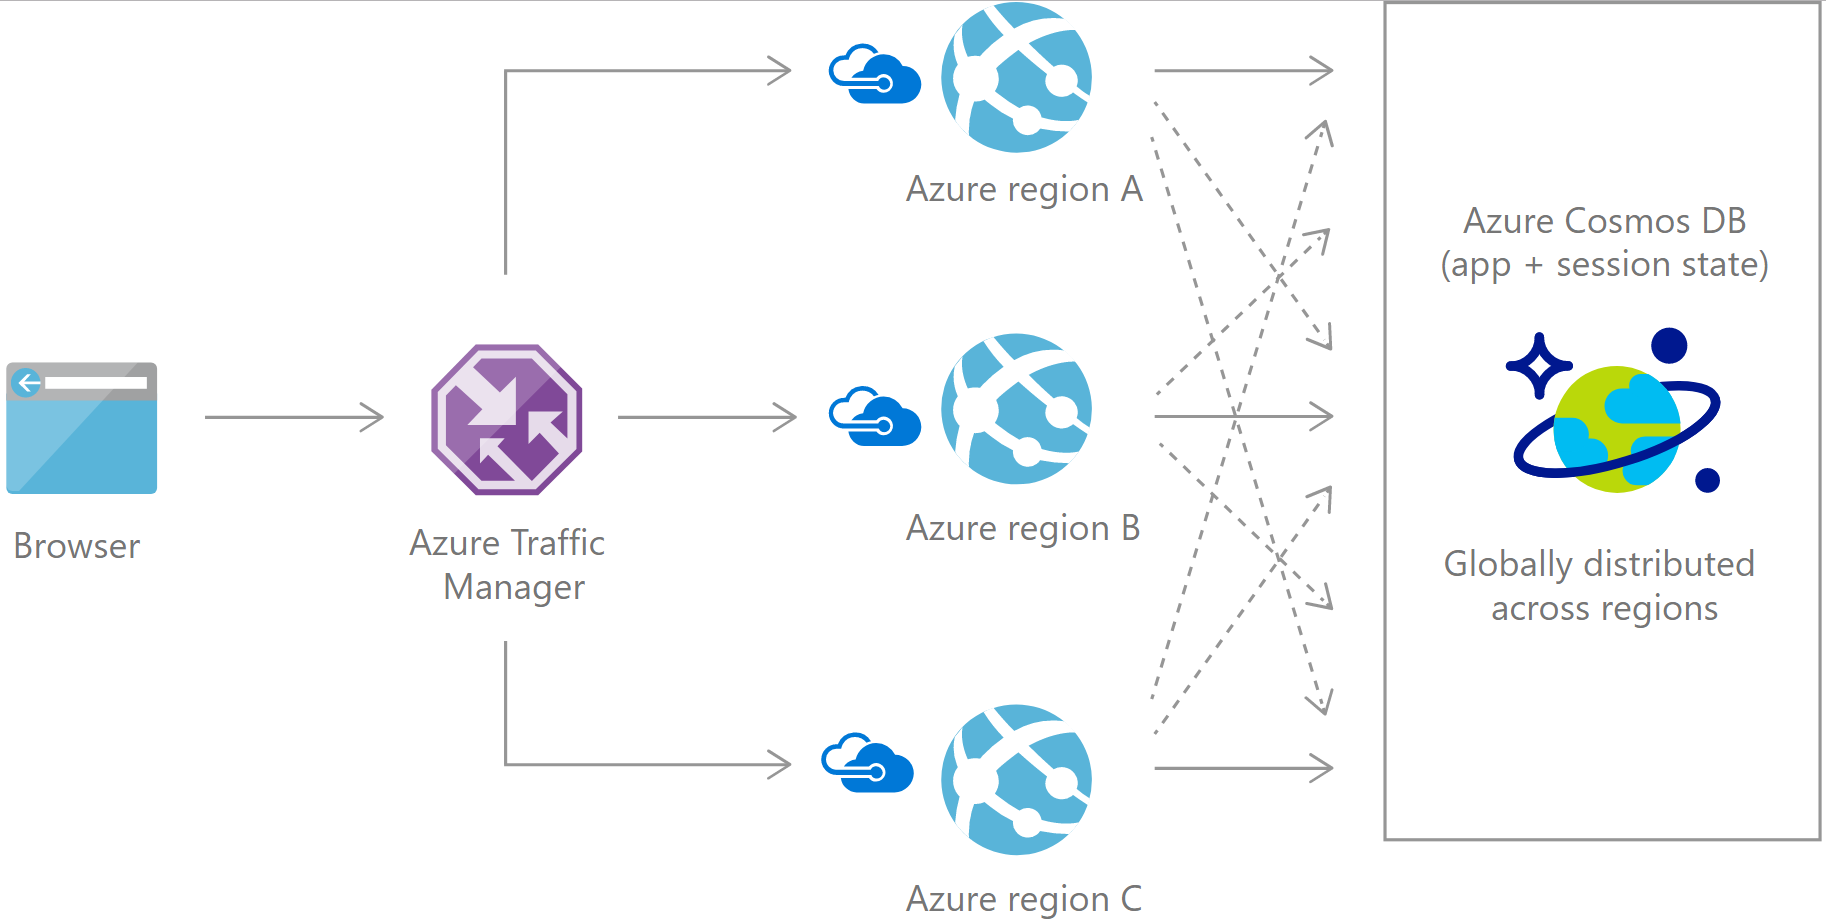 Making an Azure Web App geo-available using Traffic Manager and Cosmos DB [Image Credit: Microsoft]